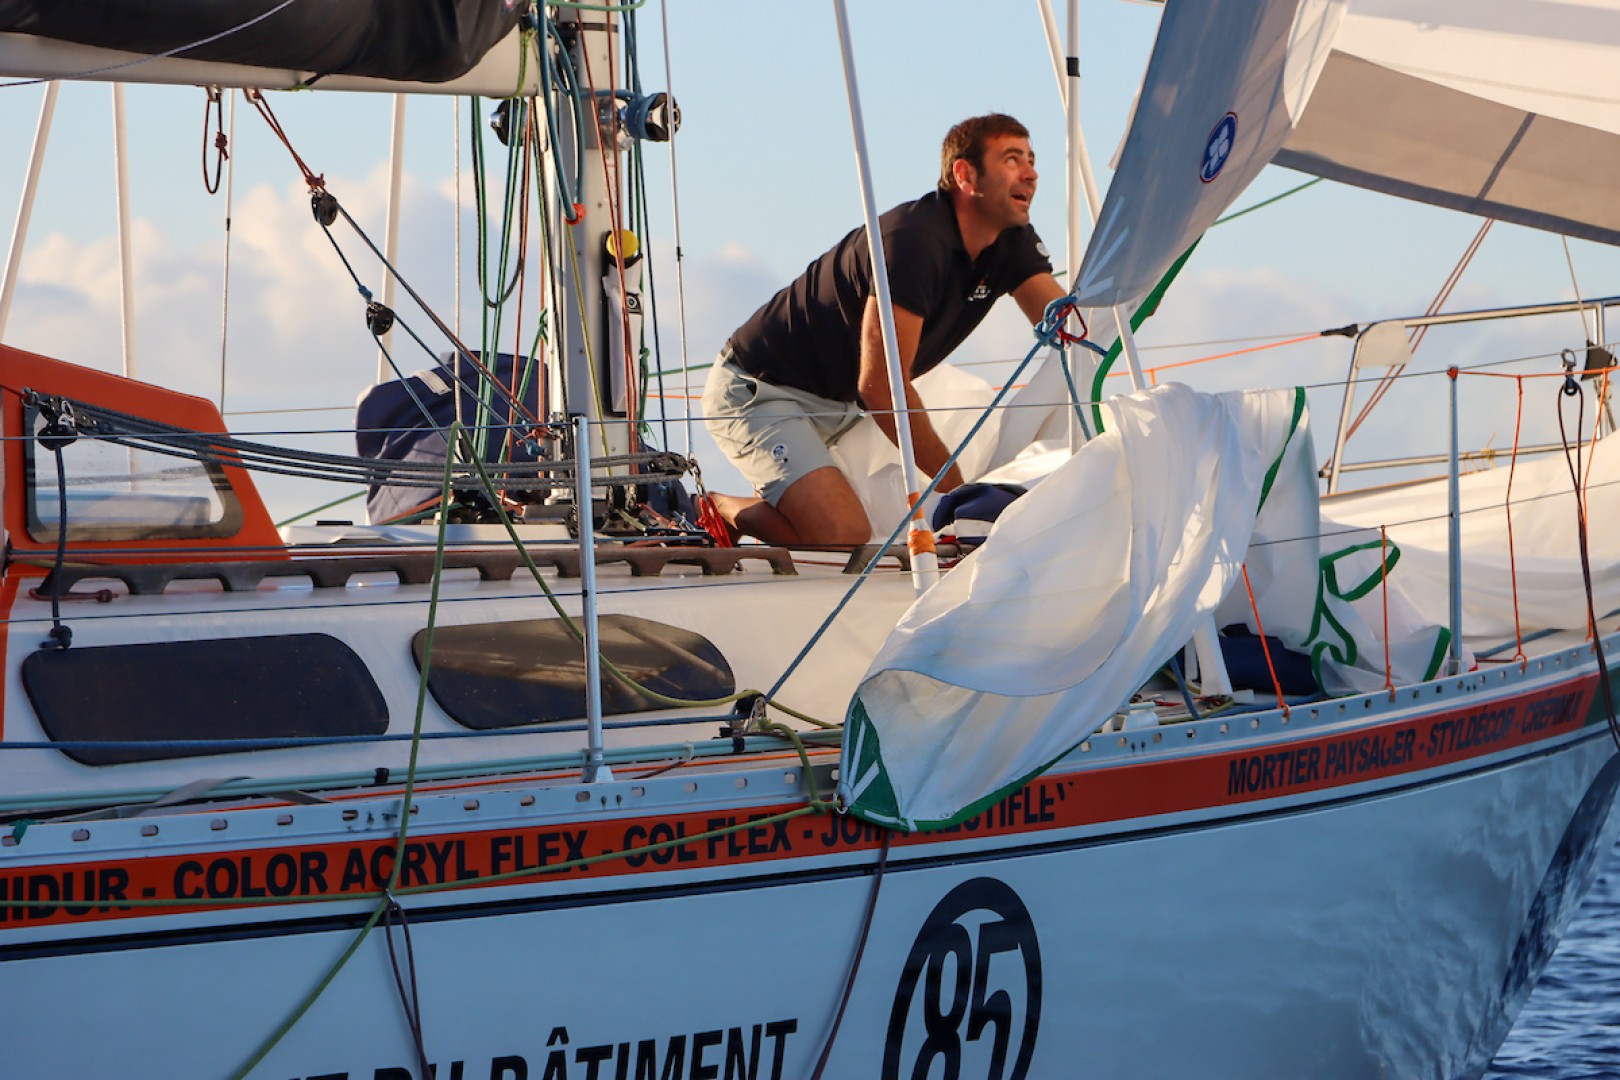 Damien, still competitive, dropped his spinnaker at the last minute, and hoisted it back at the first opportunity!